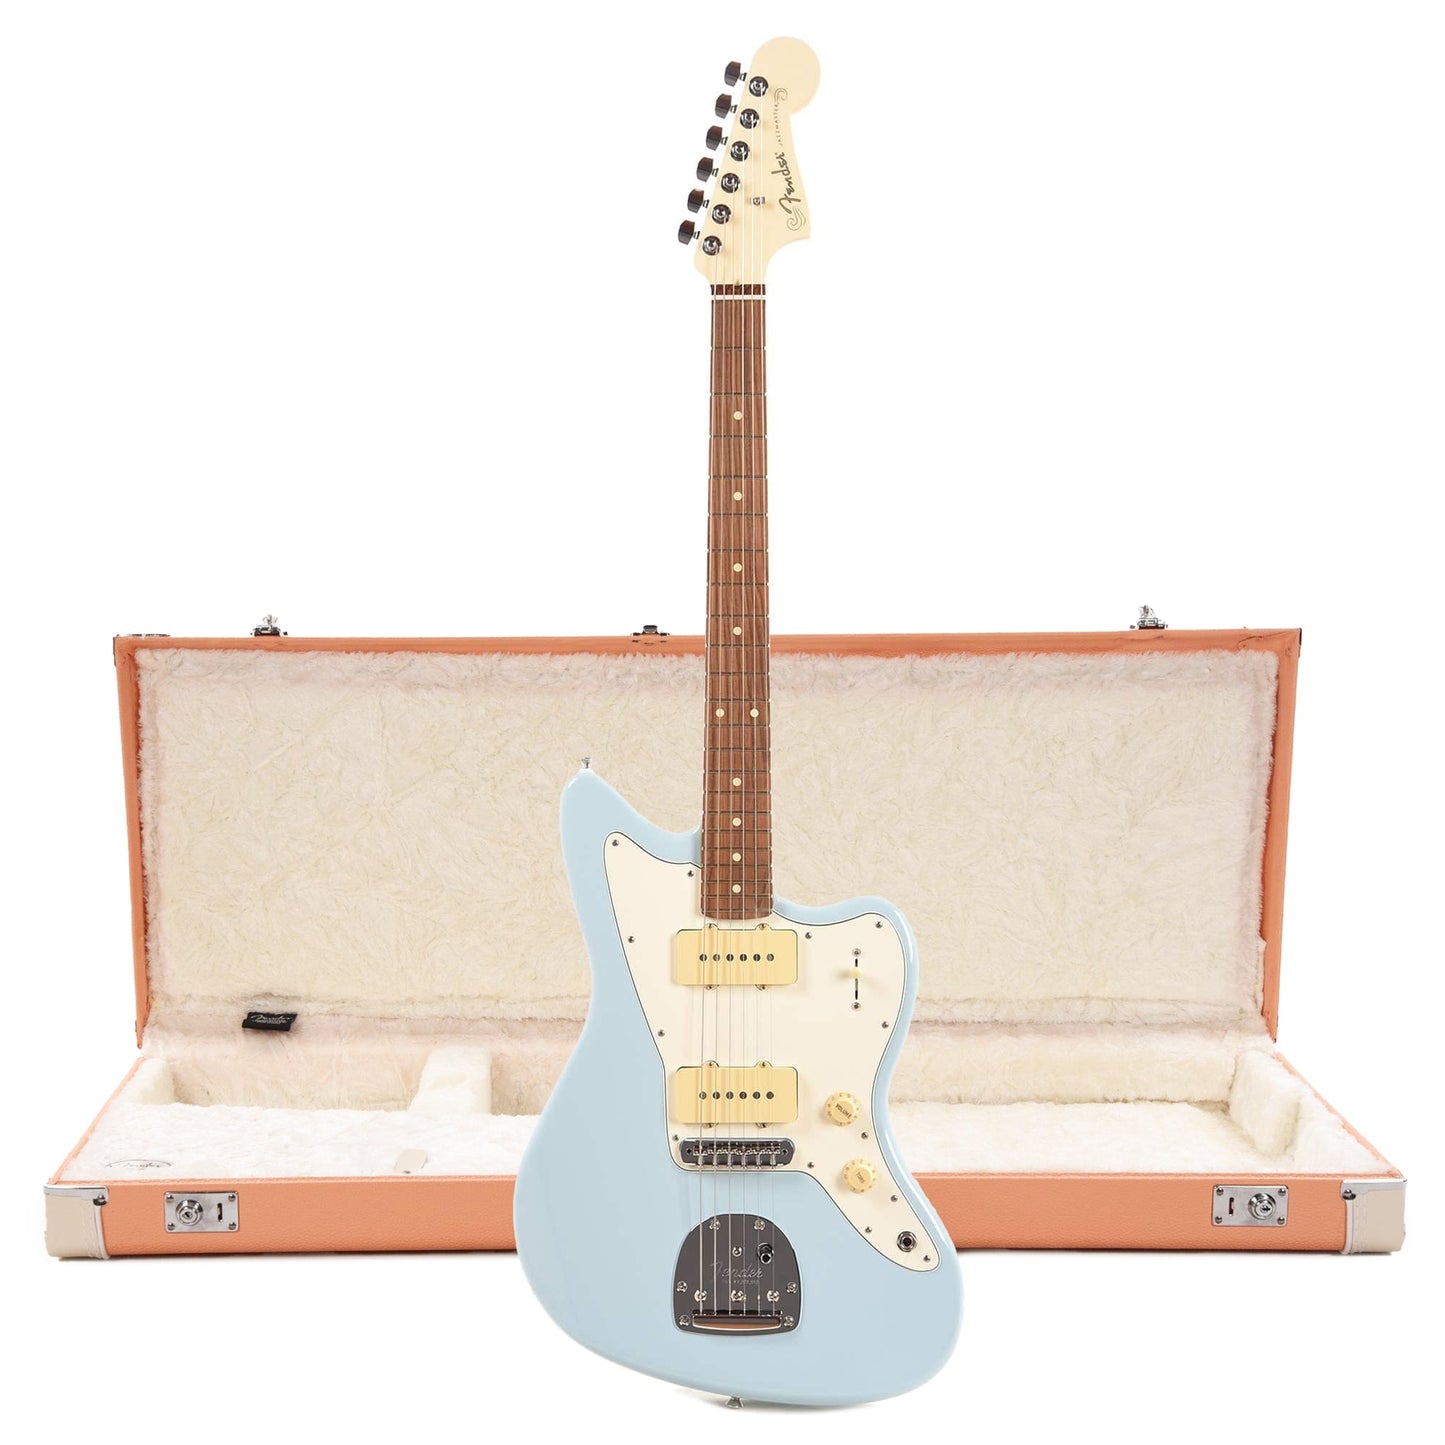 Fender Player Jazzmaster Sonic Blue w/Olympic White Headcap, Pure Vintage '65 Pickups, & Series/Parallel 4-Way and Classic Series Wood Case Jazzmaster/Jaguar Pacific Peach (CME Exclusive) Electric Guitars / Solid Body